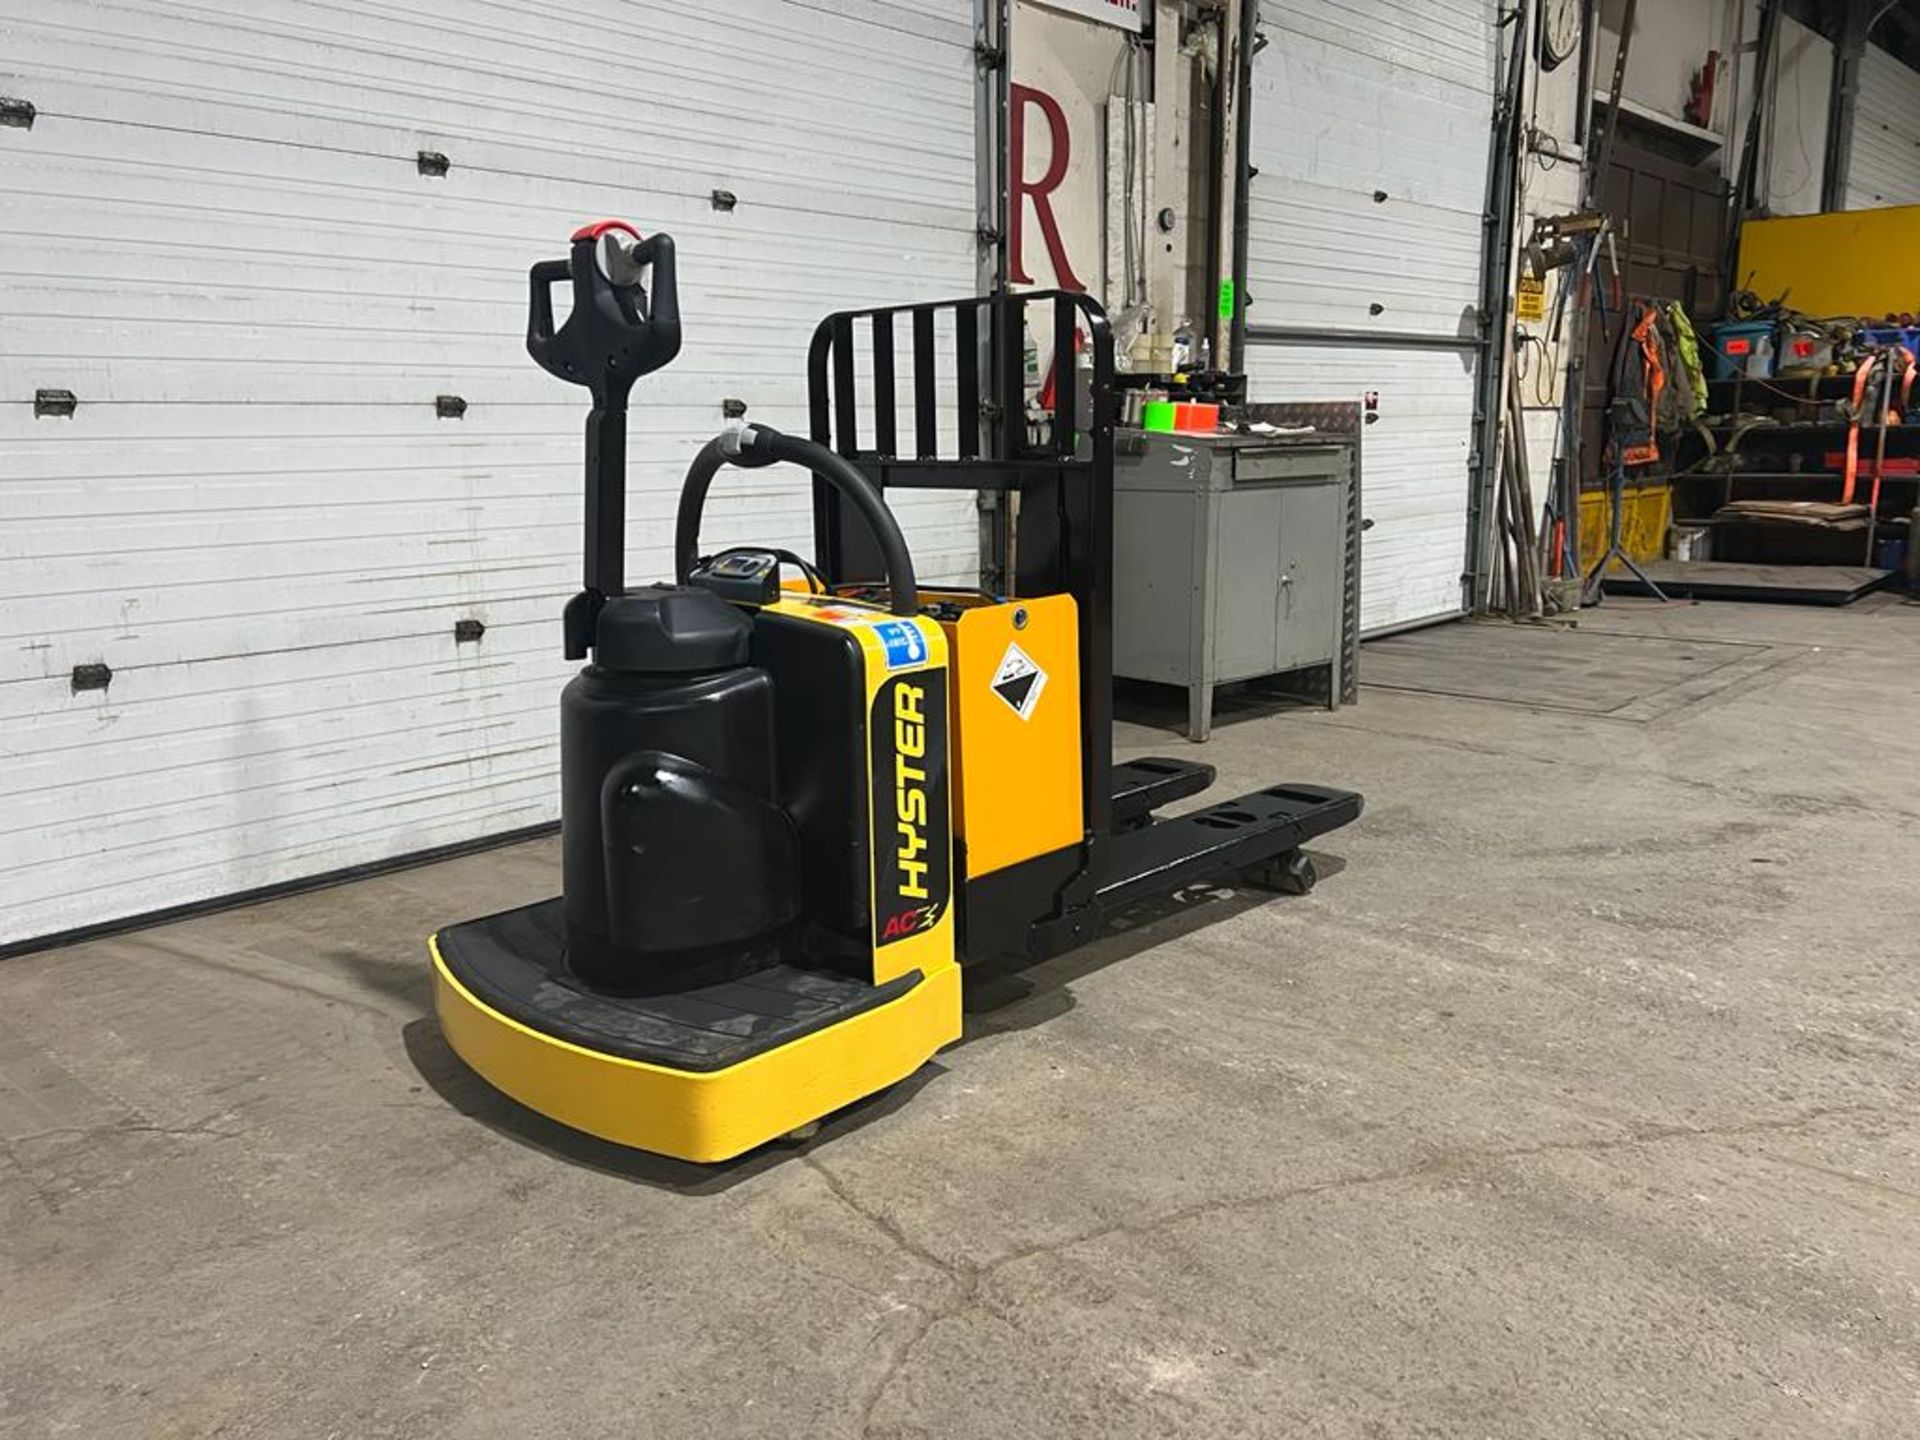 2016 Hyster RIDE ON 8000lbs capacity Powered Pallet Cart 24V NEW BATTERY Lift Ride on Walkie unit - Image 2 of 4